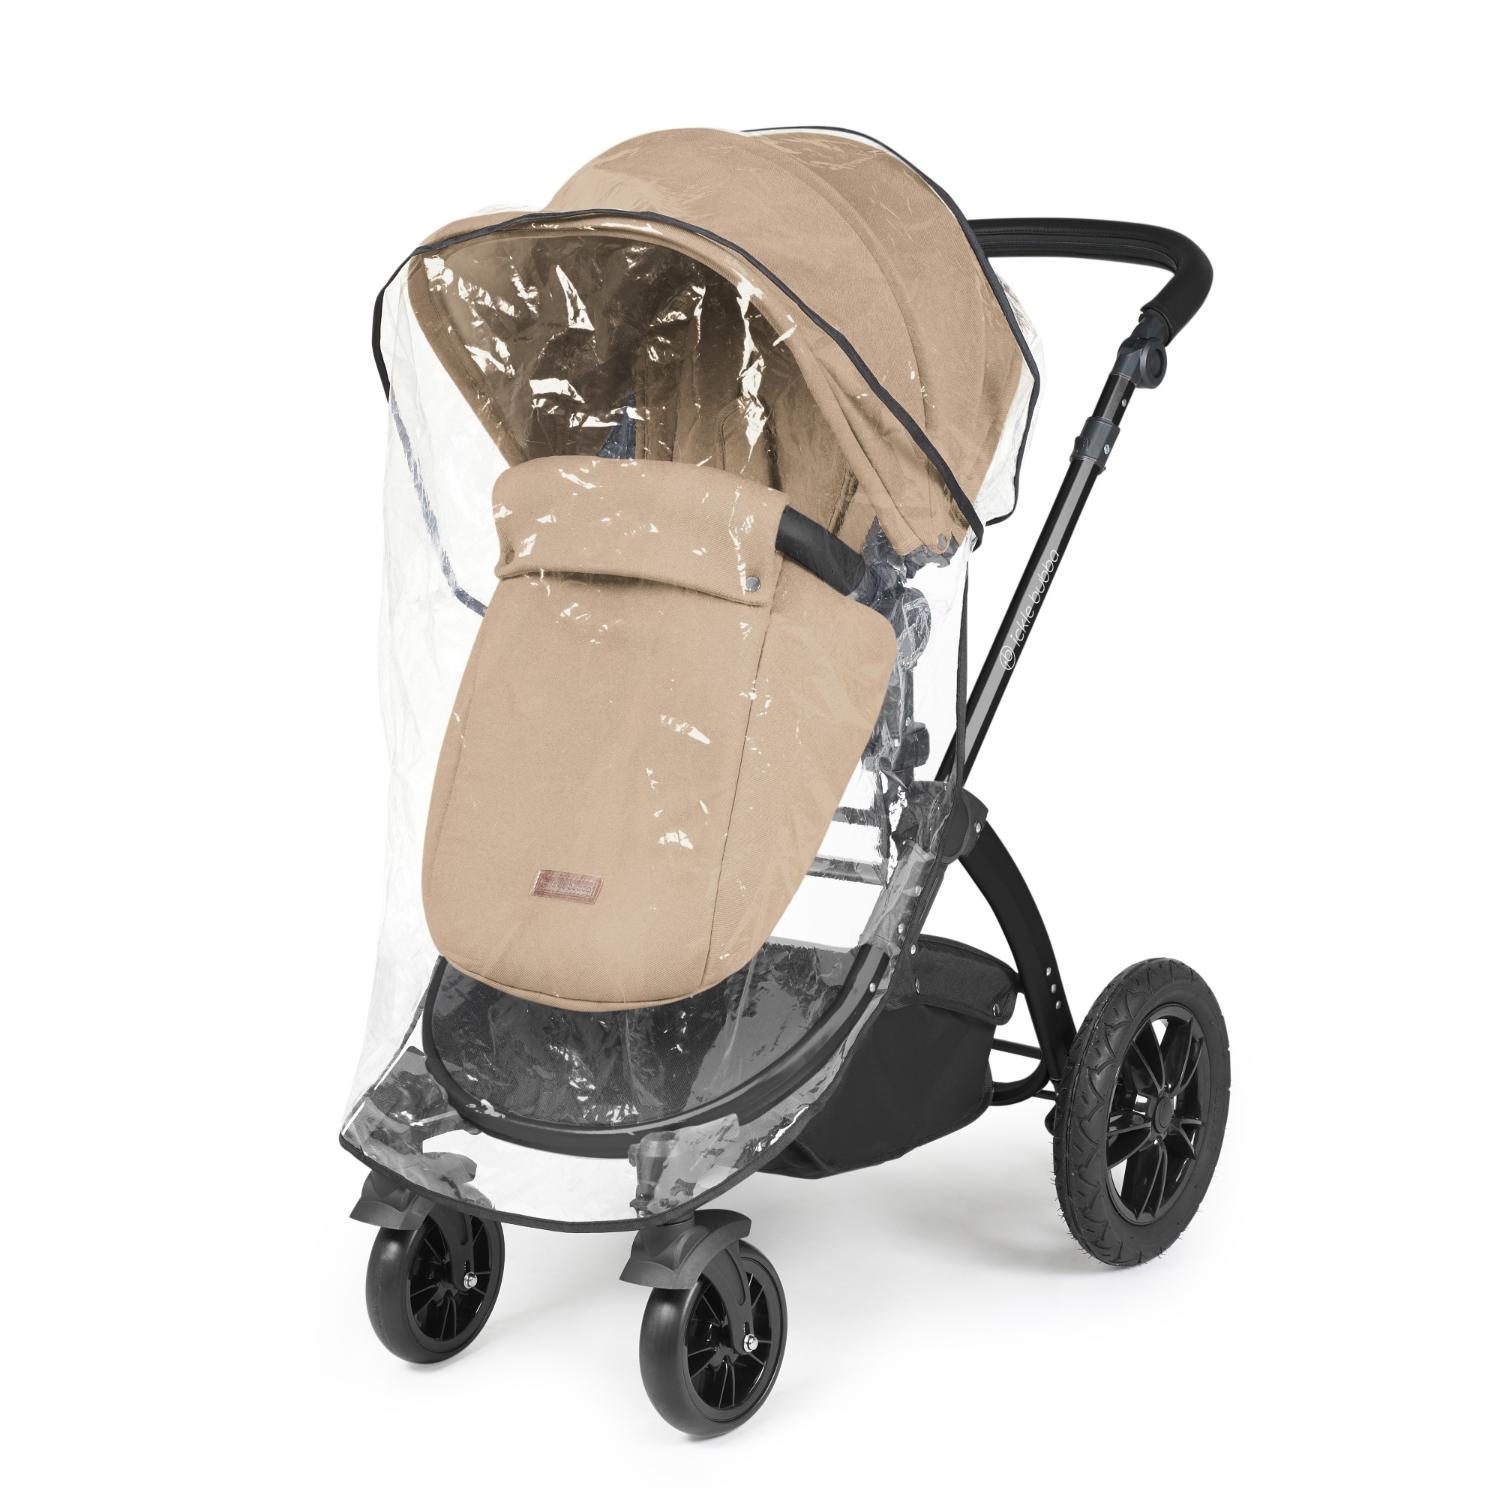 Rain cover placed on an Ickle Bubba Stomp Luxe Pushchair in Desert beige colour